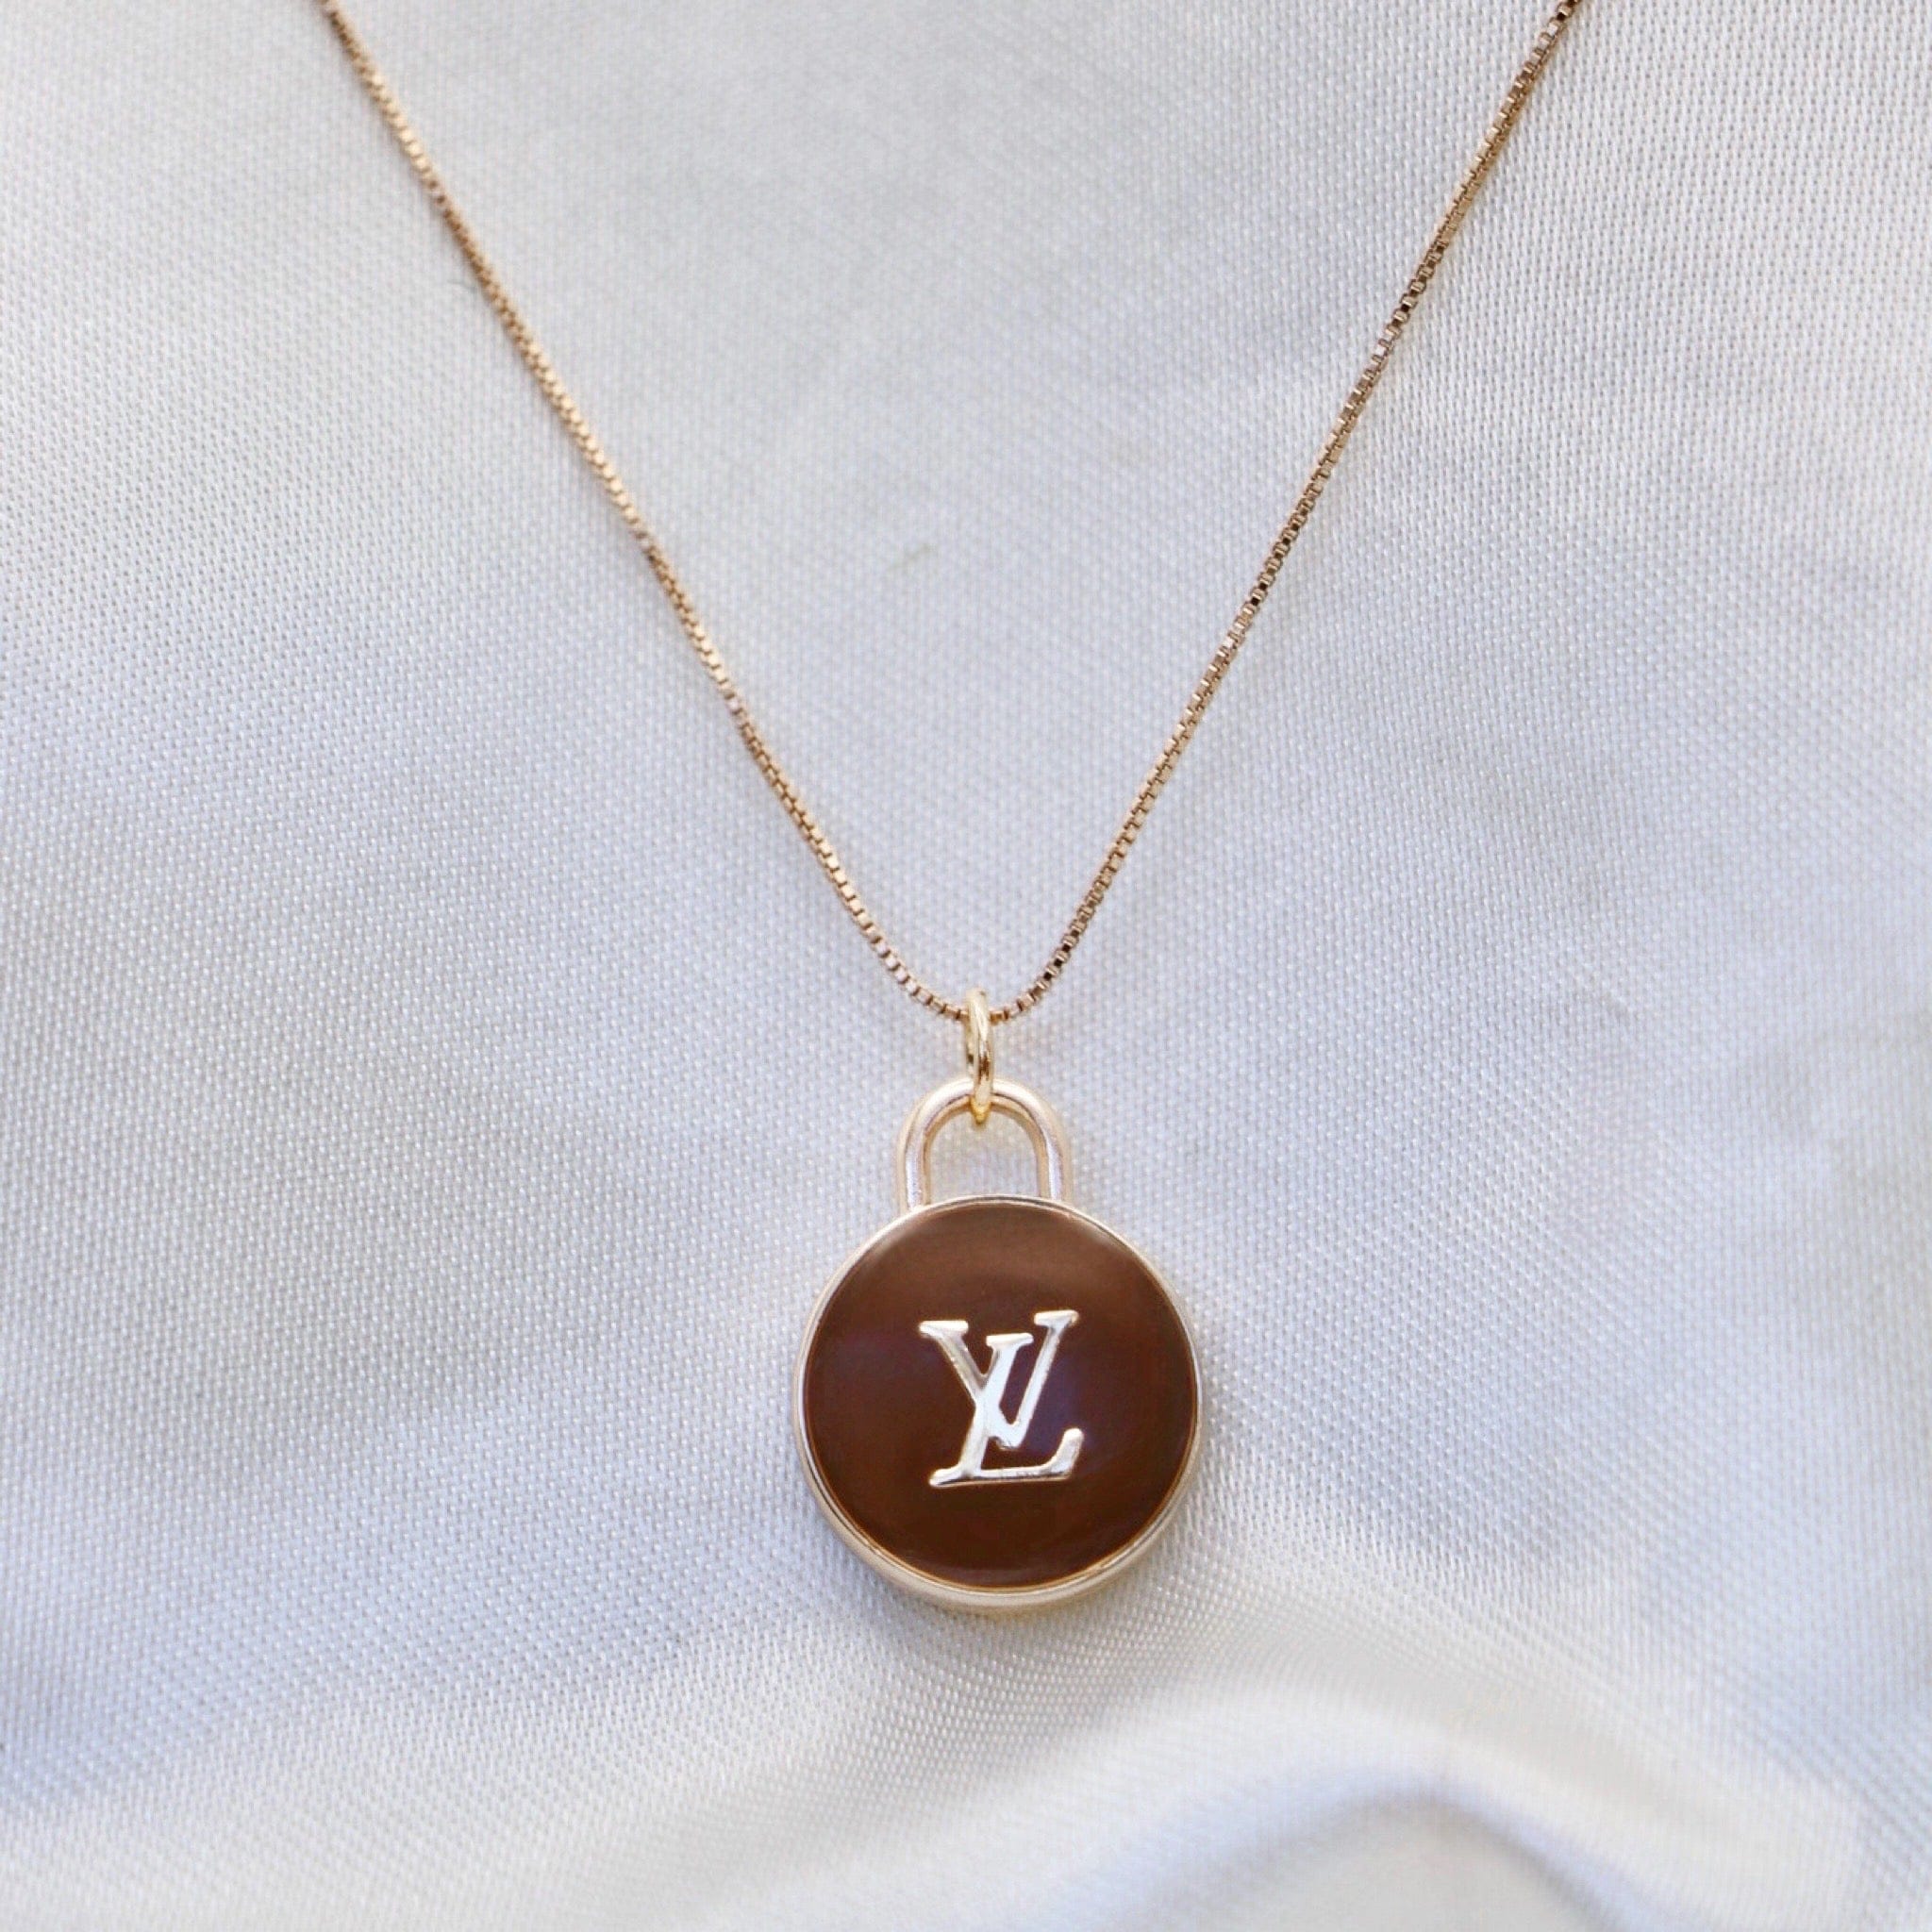 Used LV Necklace] Louis Vuitton Popular Charm Necklace Pole